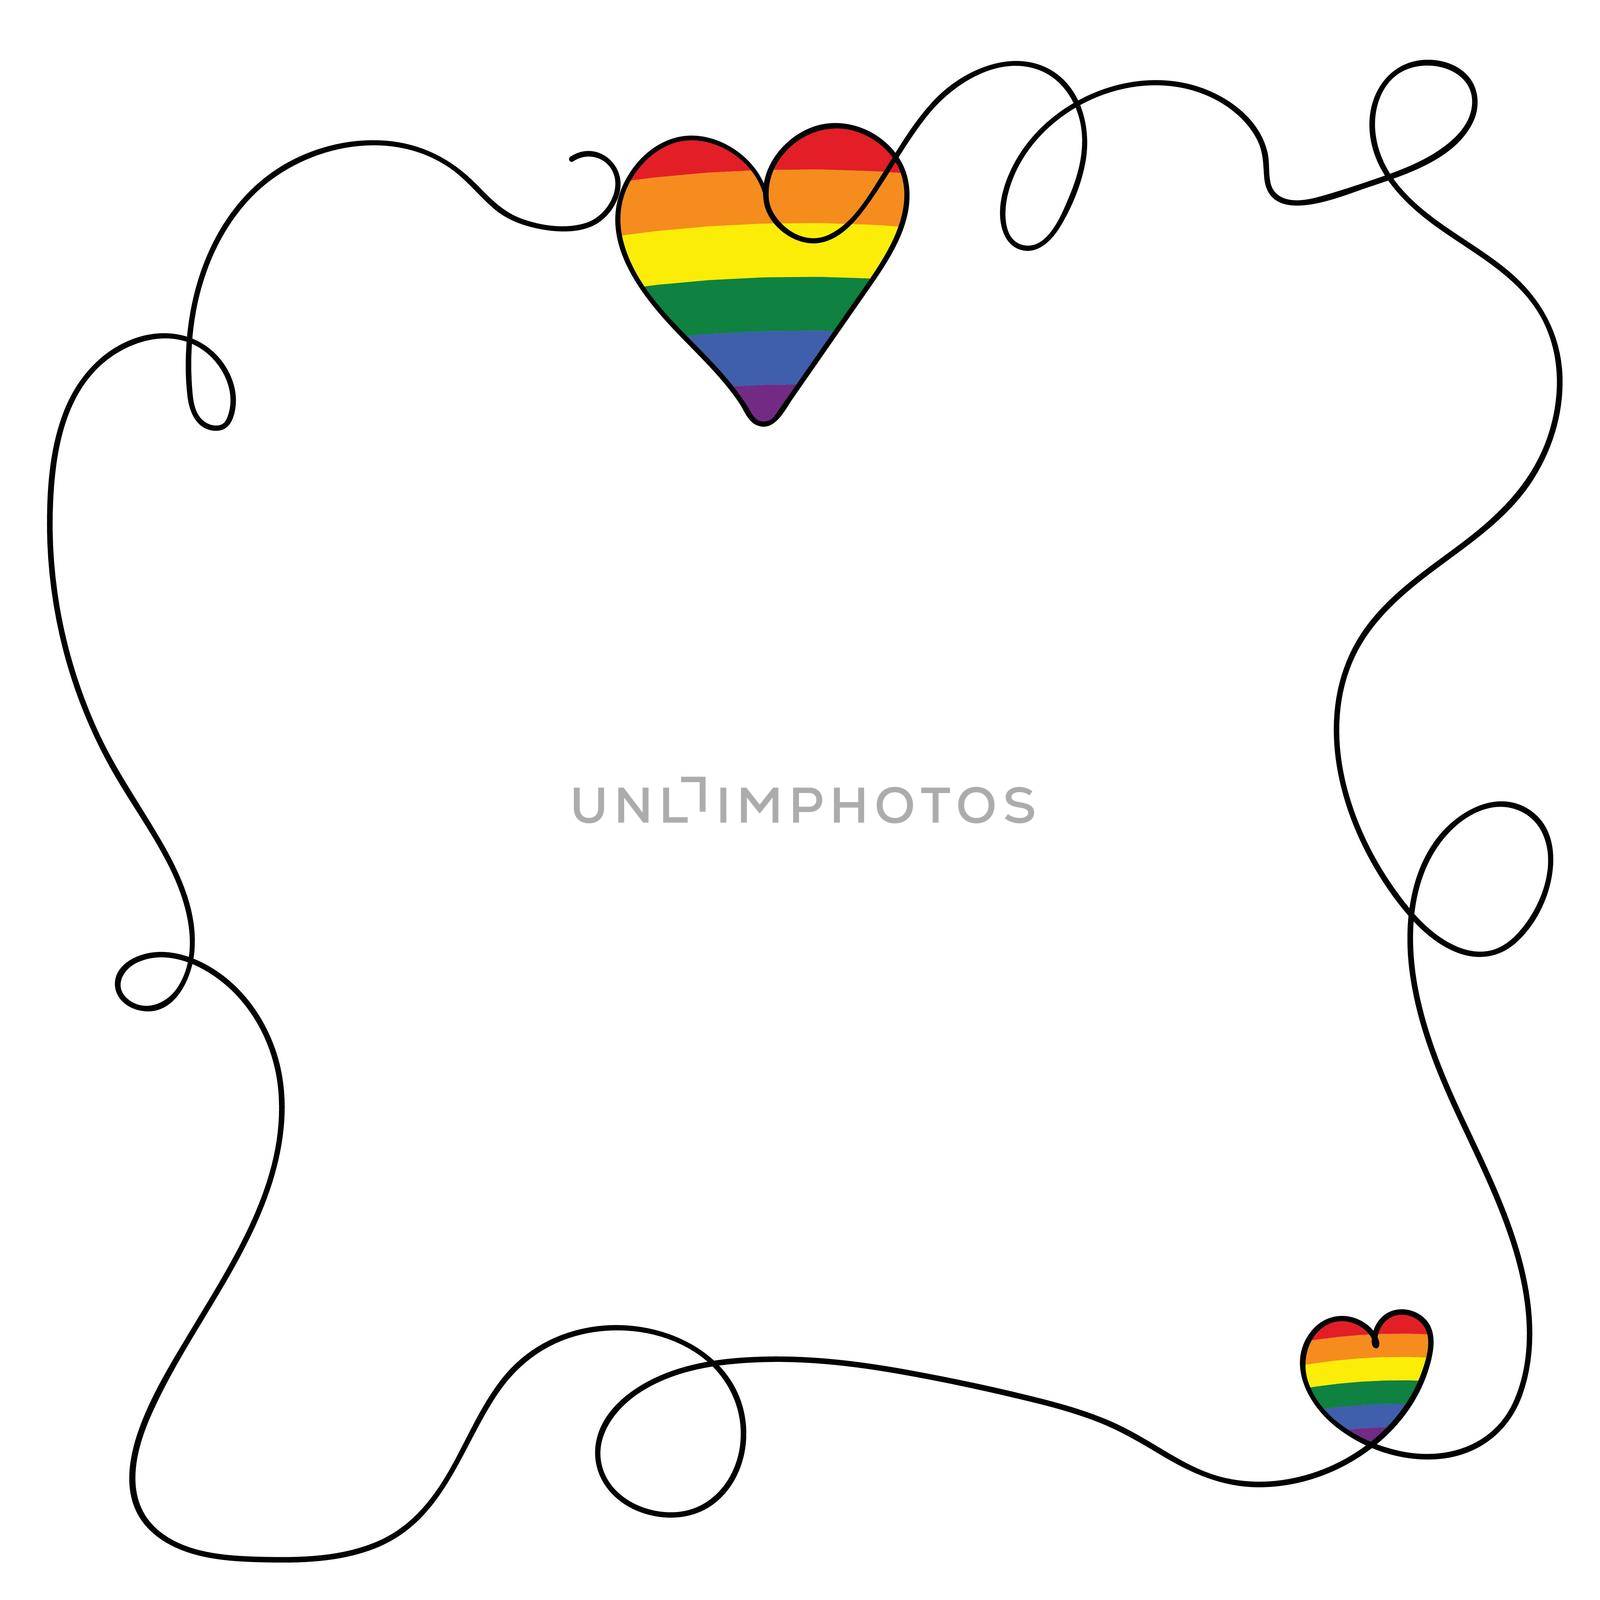 Flag LGBT icon, decorative frame, hand drow border with hearts. Template design, vector illustration. Love wins. LGBT symbol in rainbow colors. Gay pride collection. Copy space by allaku